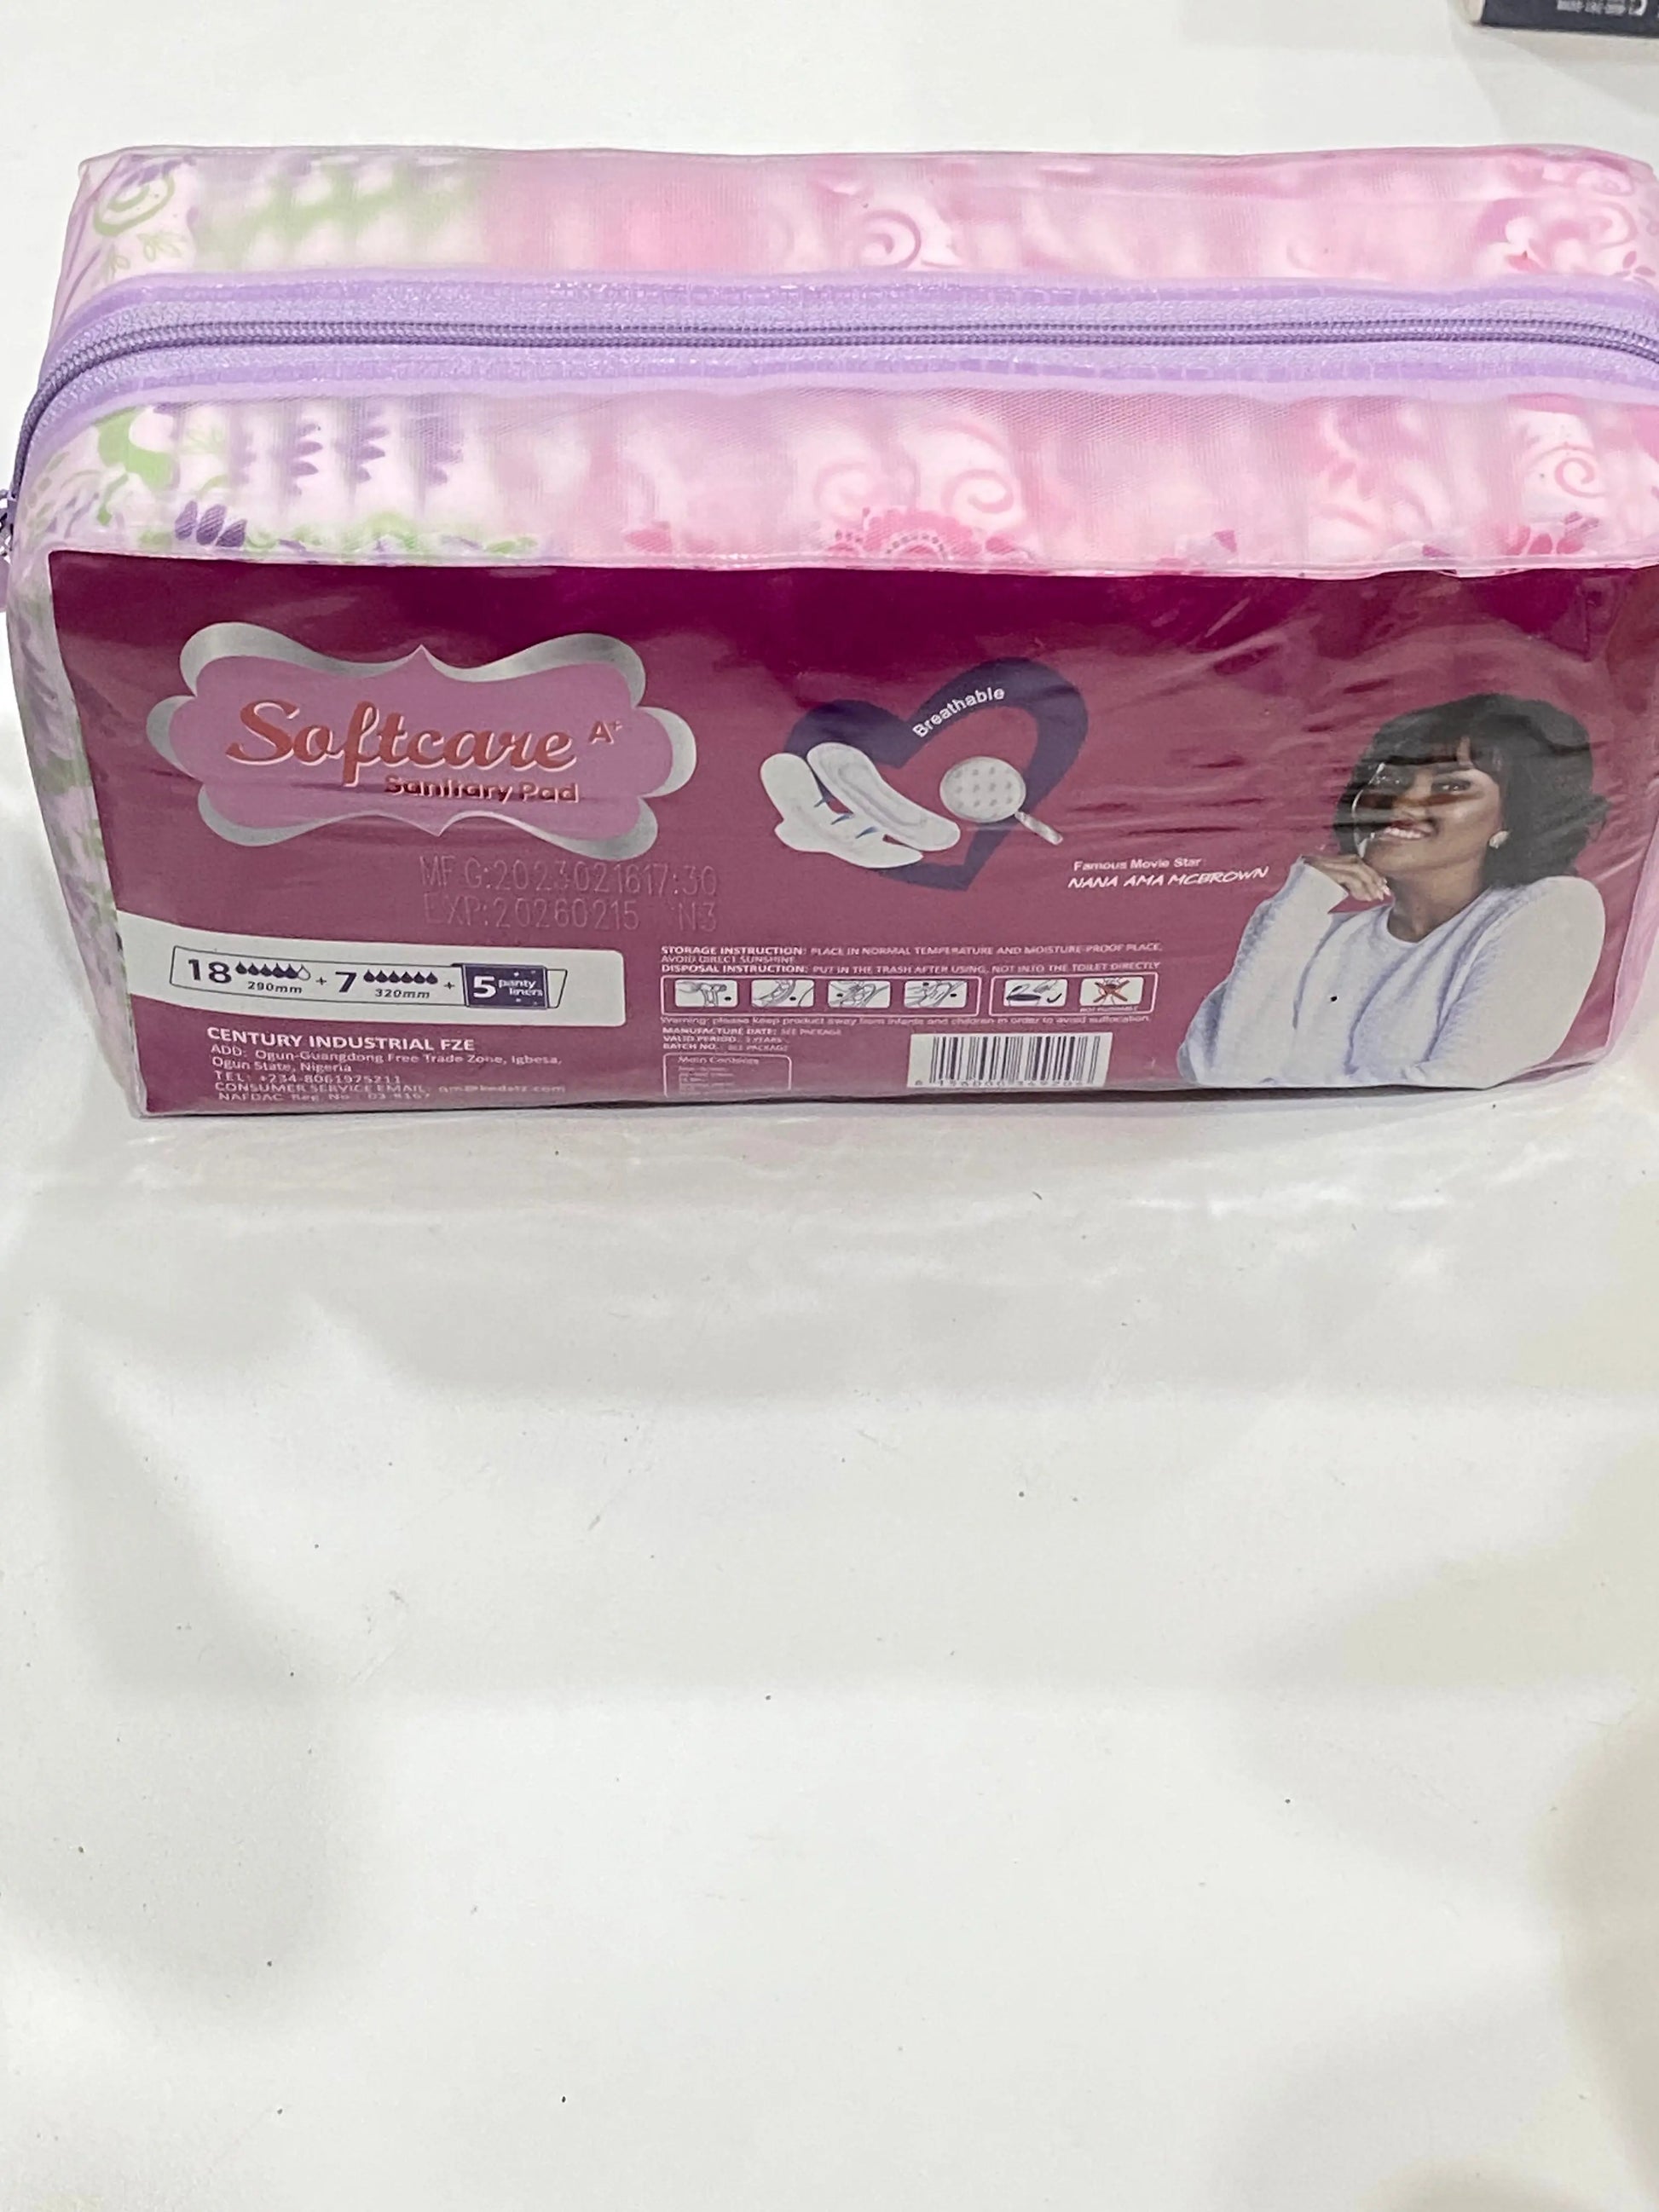 Soft Care Sanitary Pads and Pant Liners La Mimz Beauty & Fashion Store